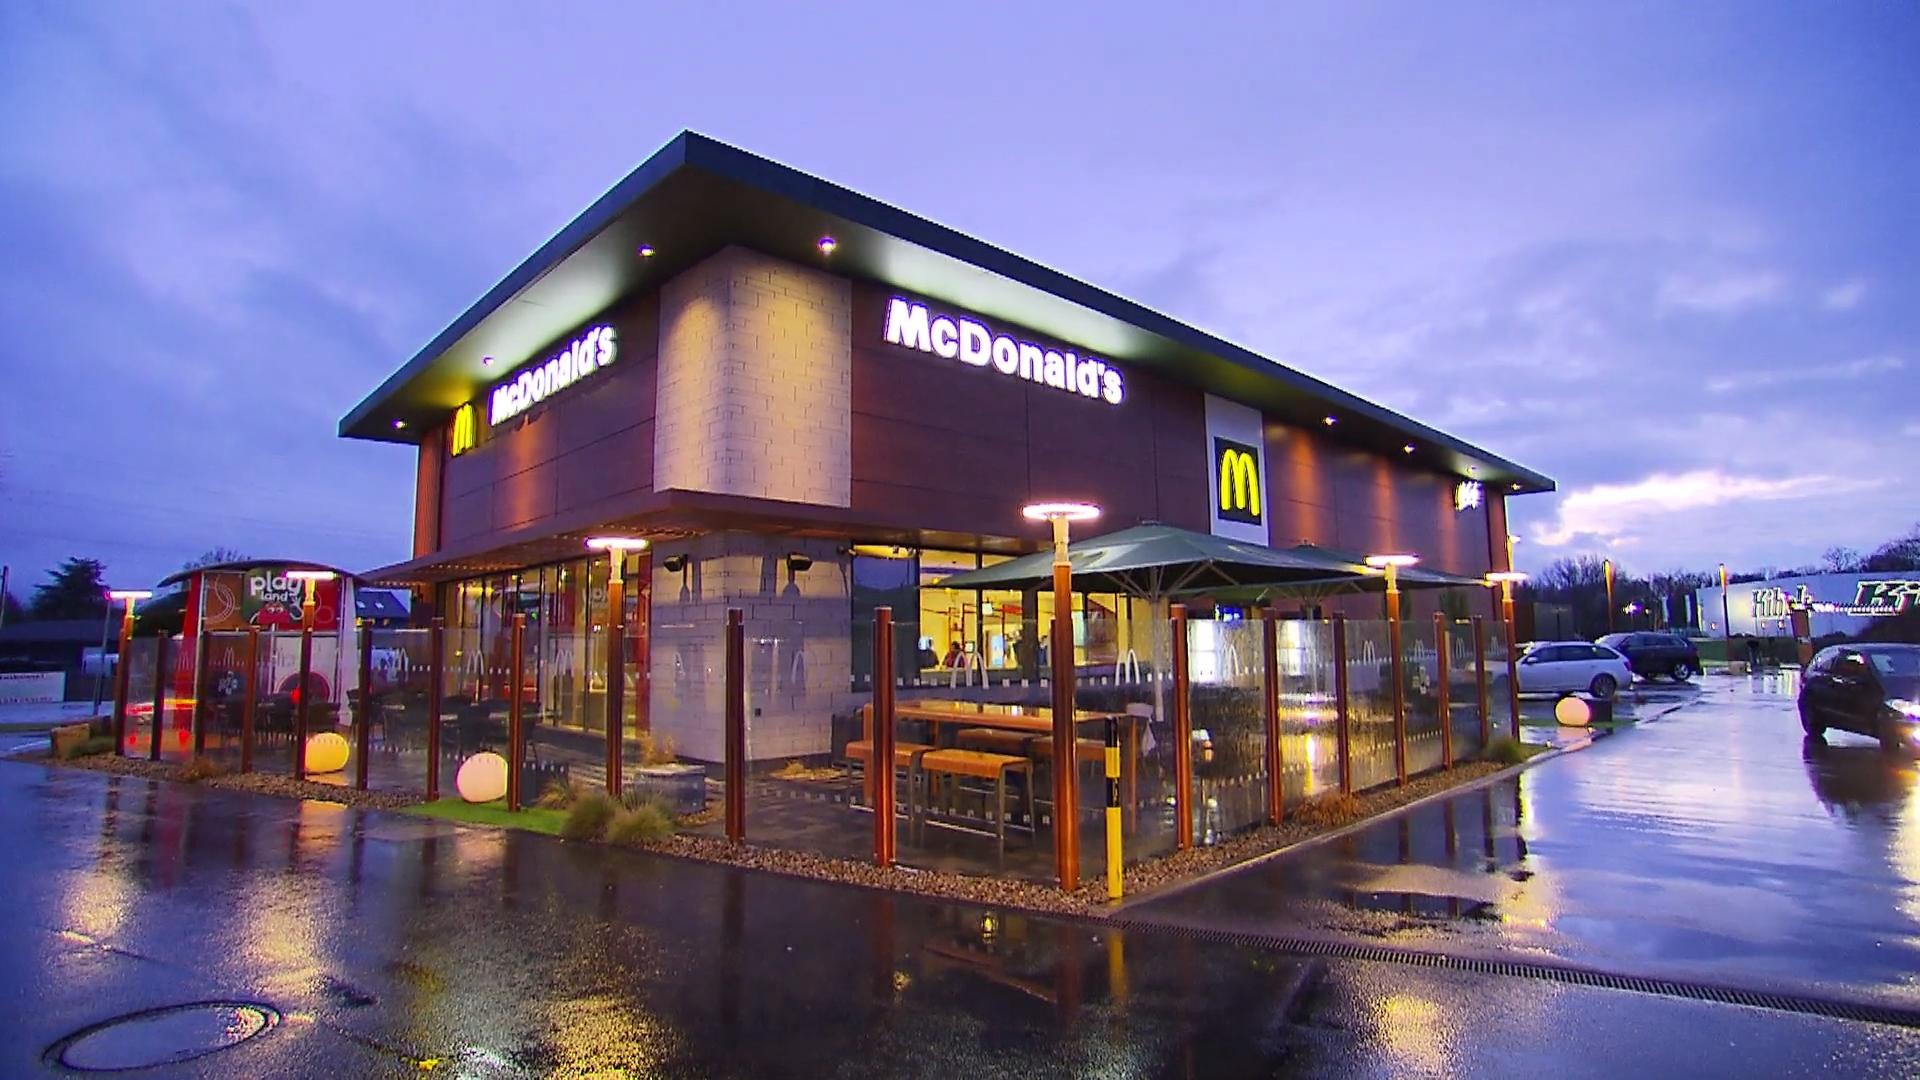 Now you can get married at McDonald's!  The romance of fast food